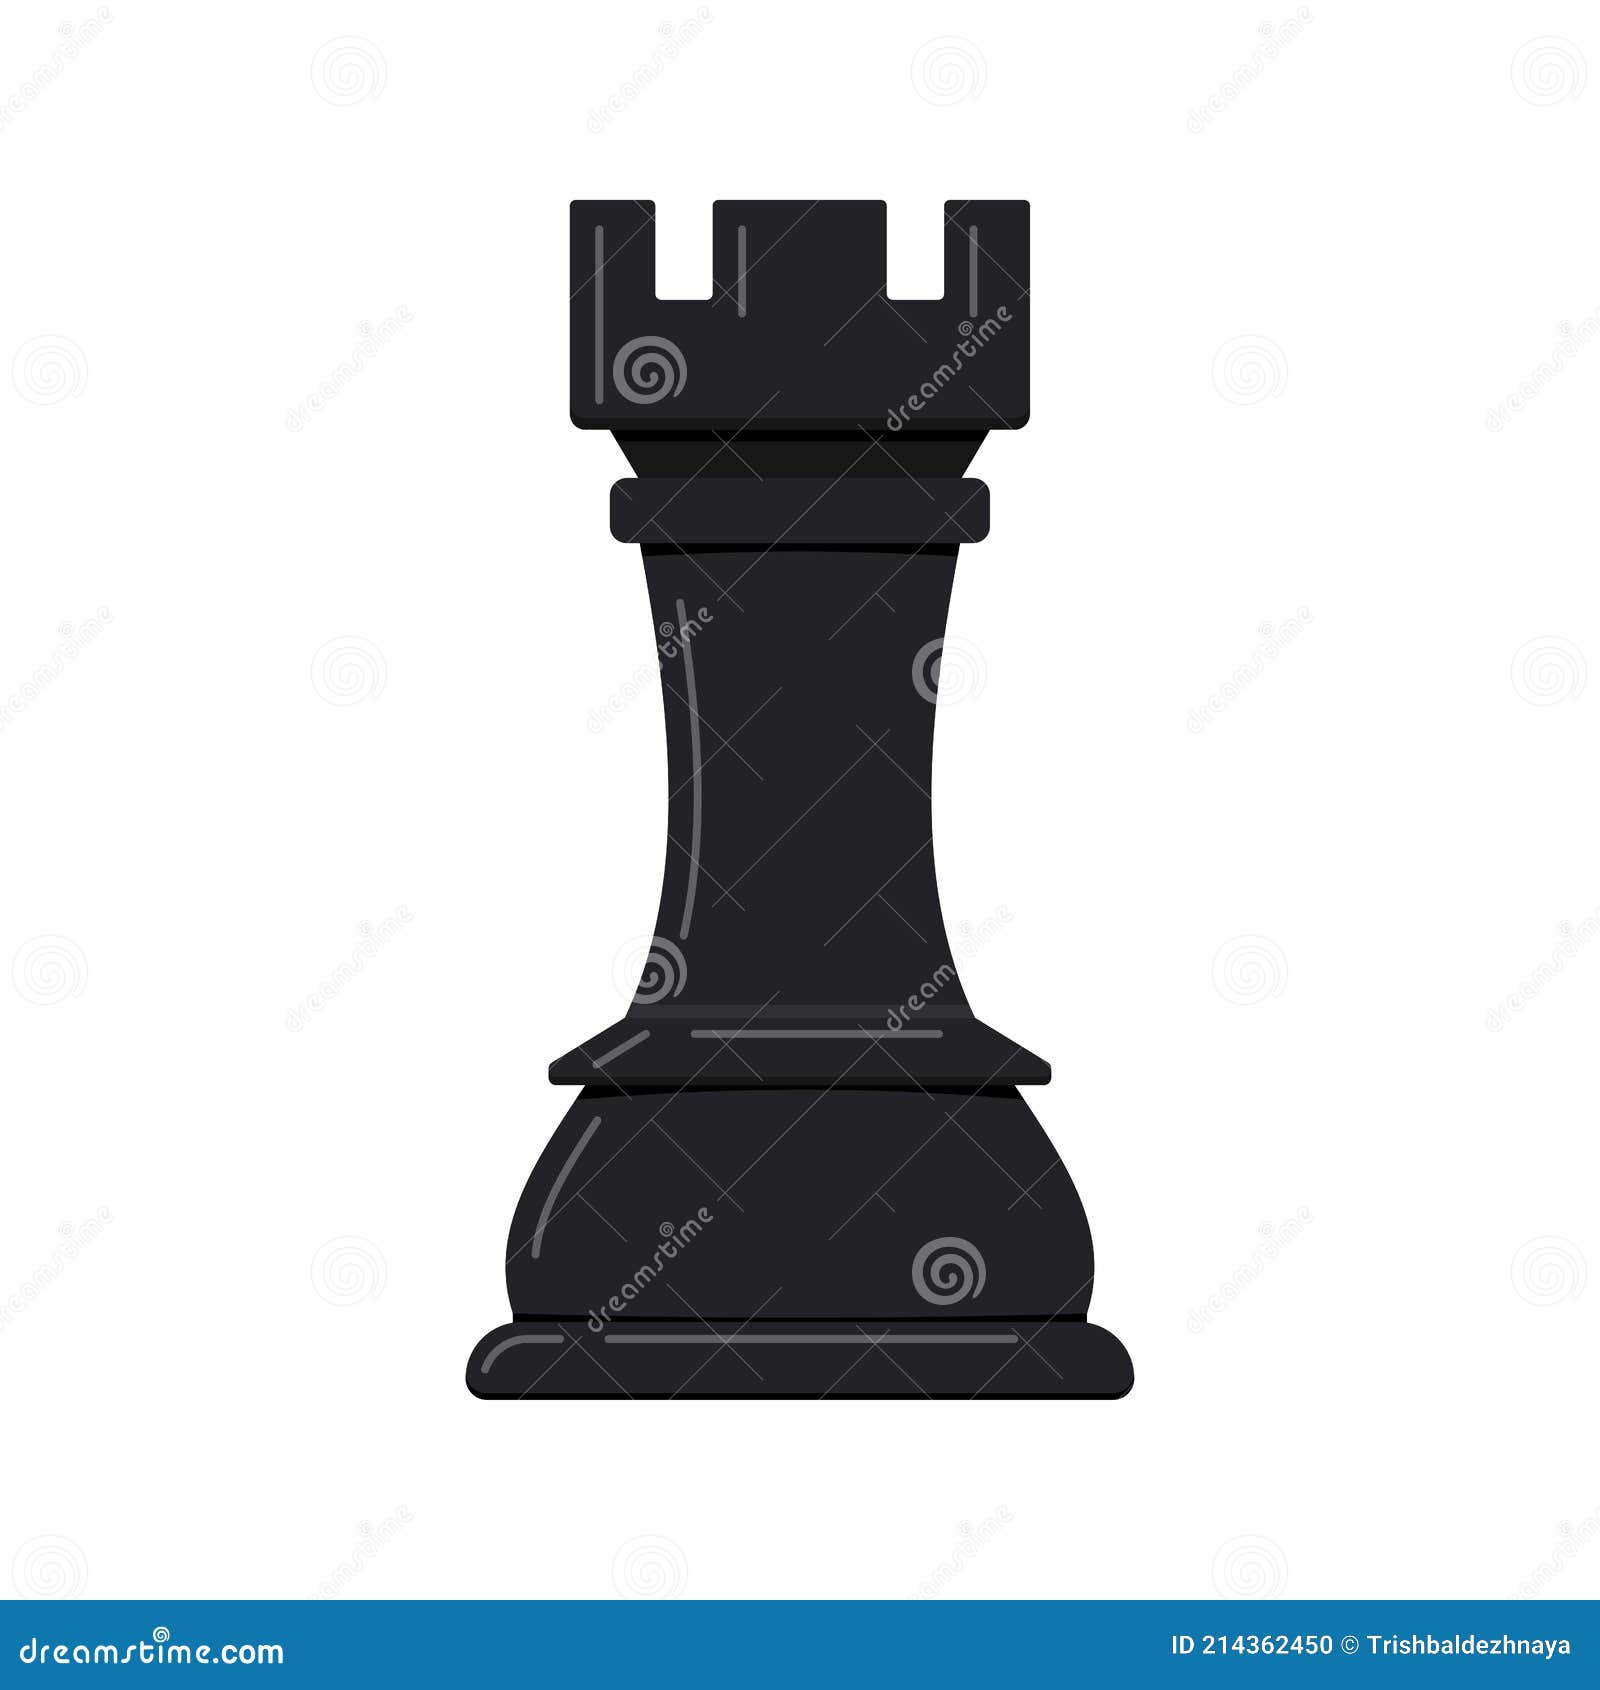 Rook black and white chess piece Royalty Free Vector Image